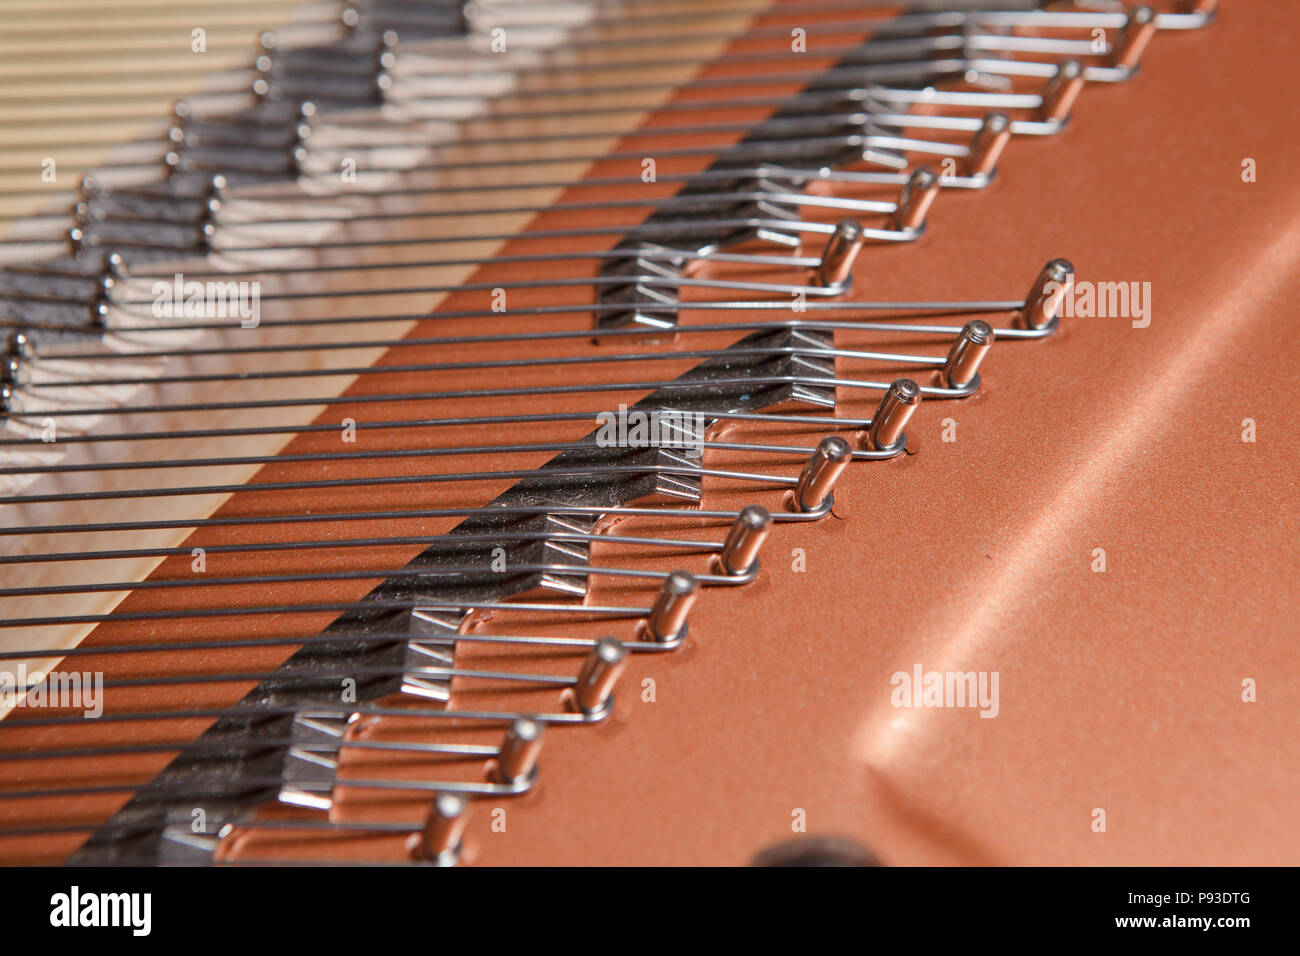 high tones strings inside piano, close up Stock Photo